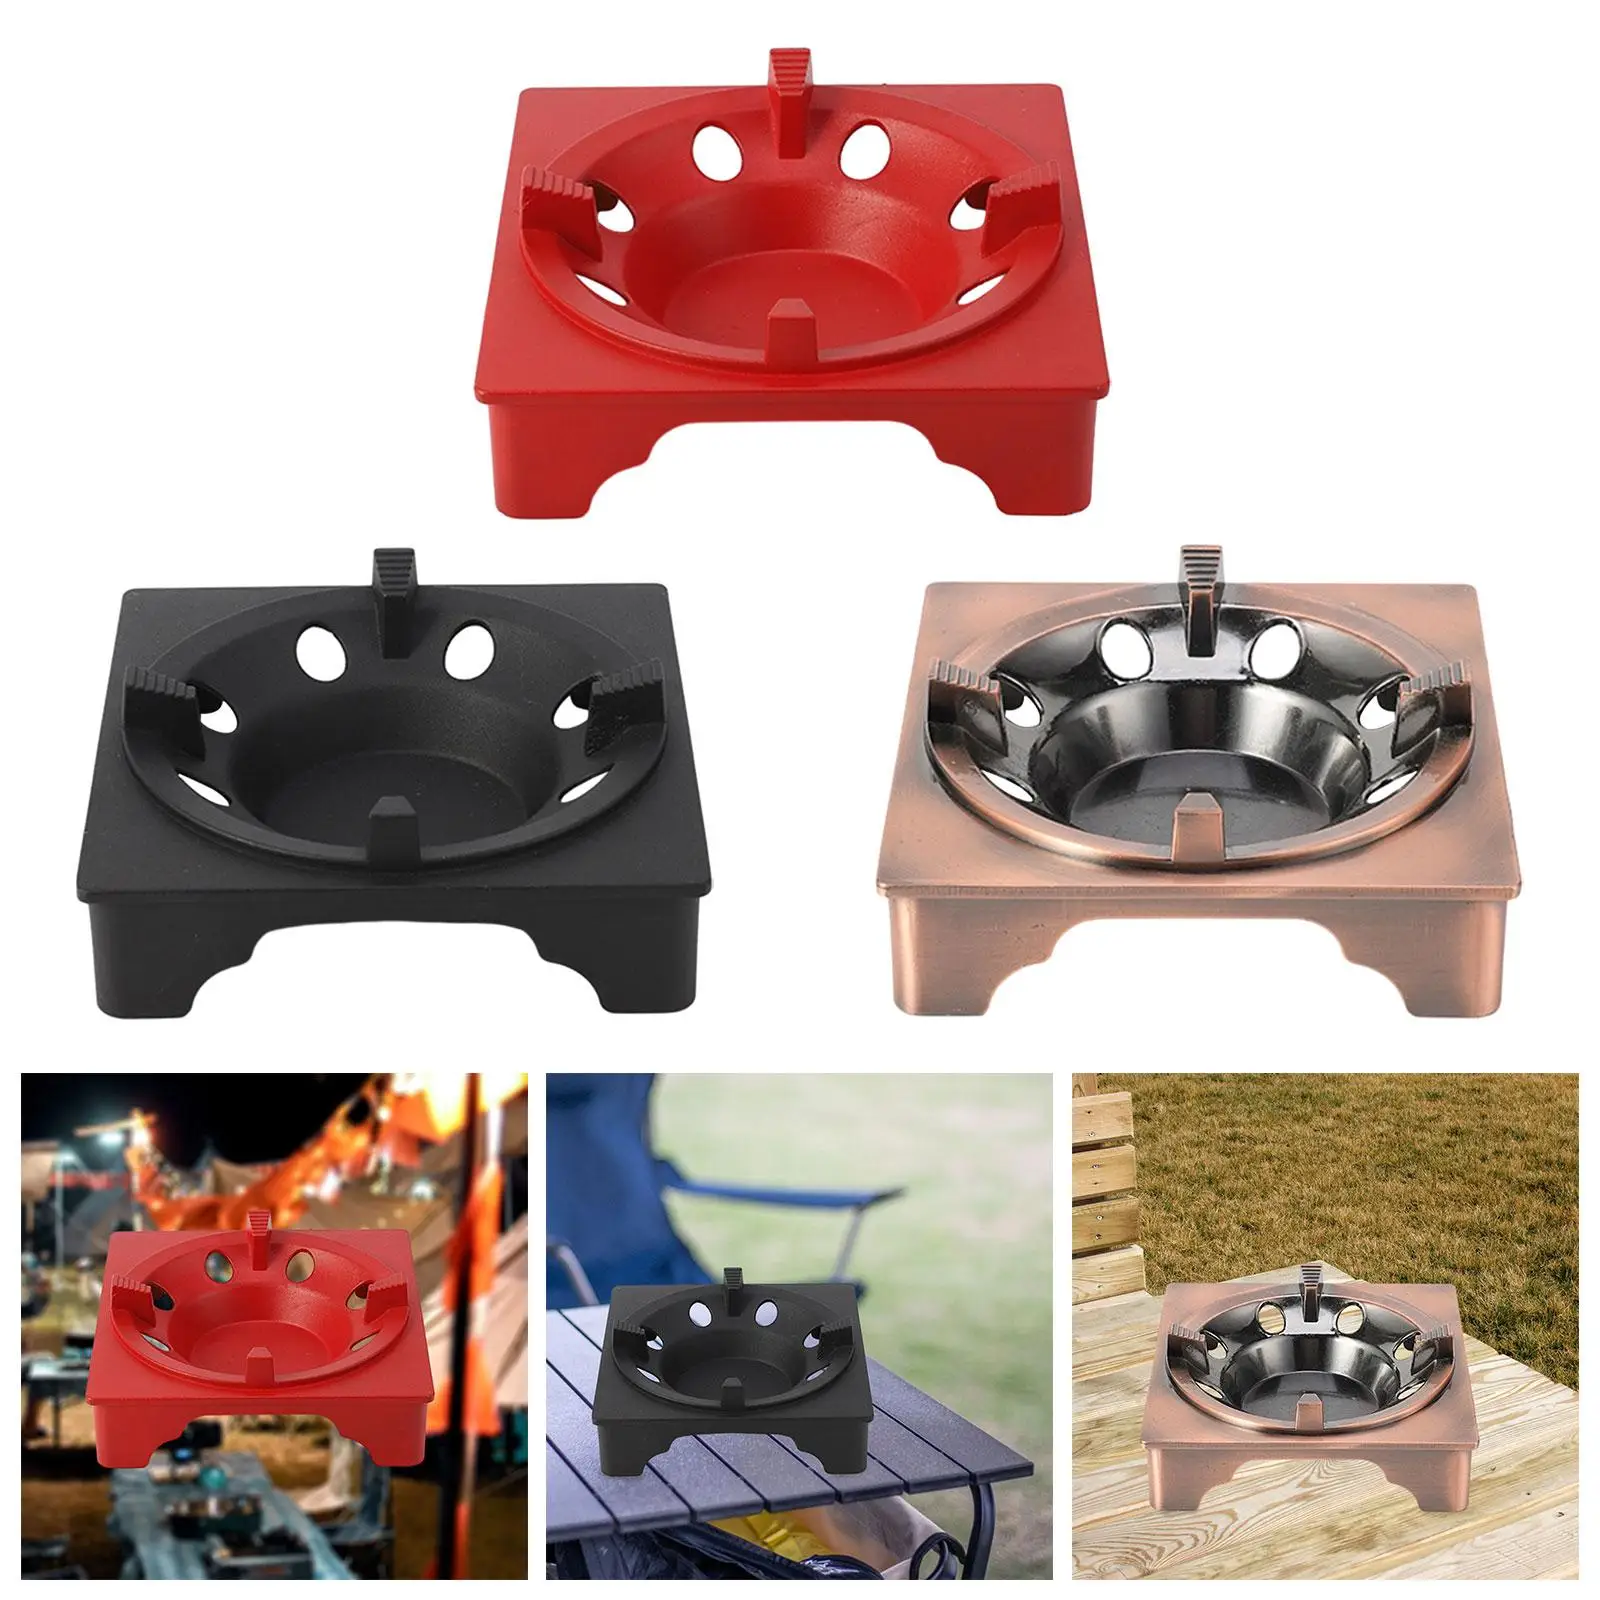 Camping Stove Fondue Stove Wok Stand Cookware Spirit Burner Stove Fire Boiler Cooking Stove for Cooking Hiking Backpacking